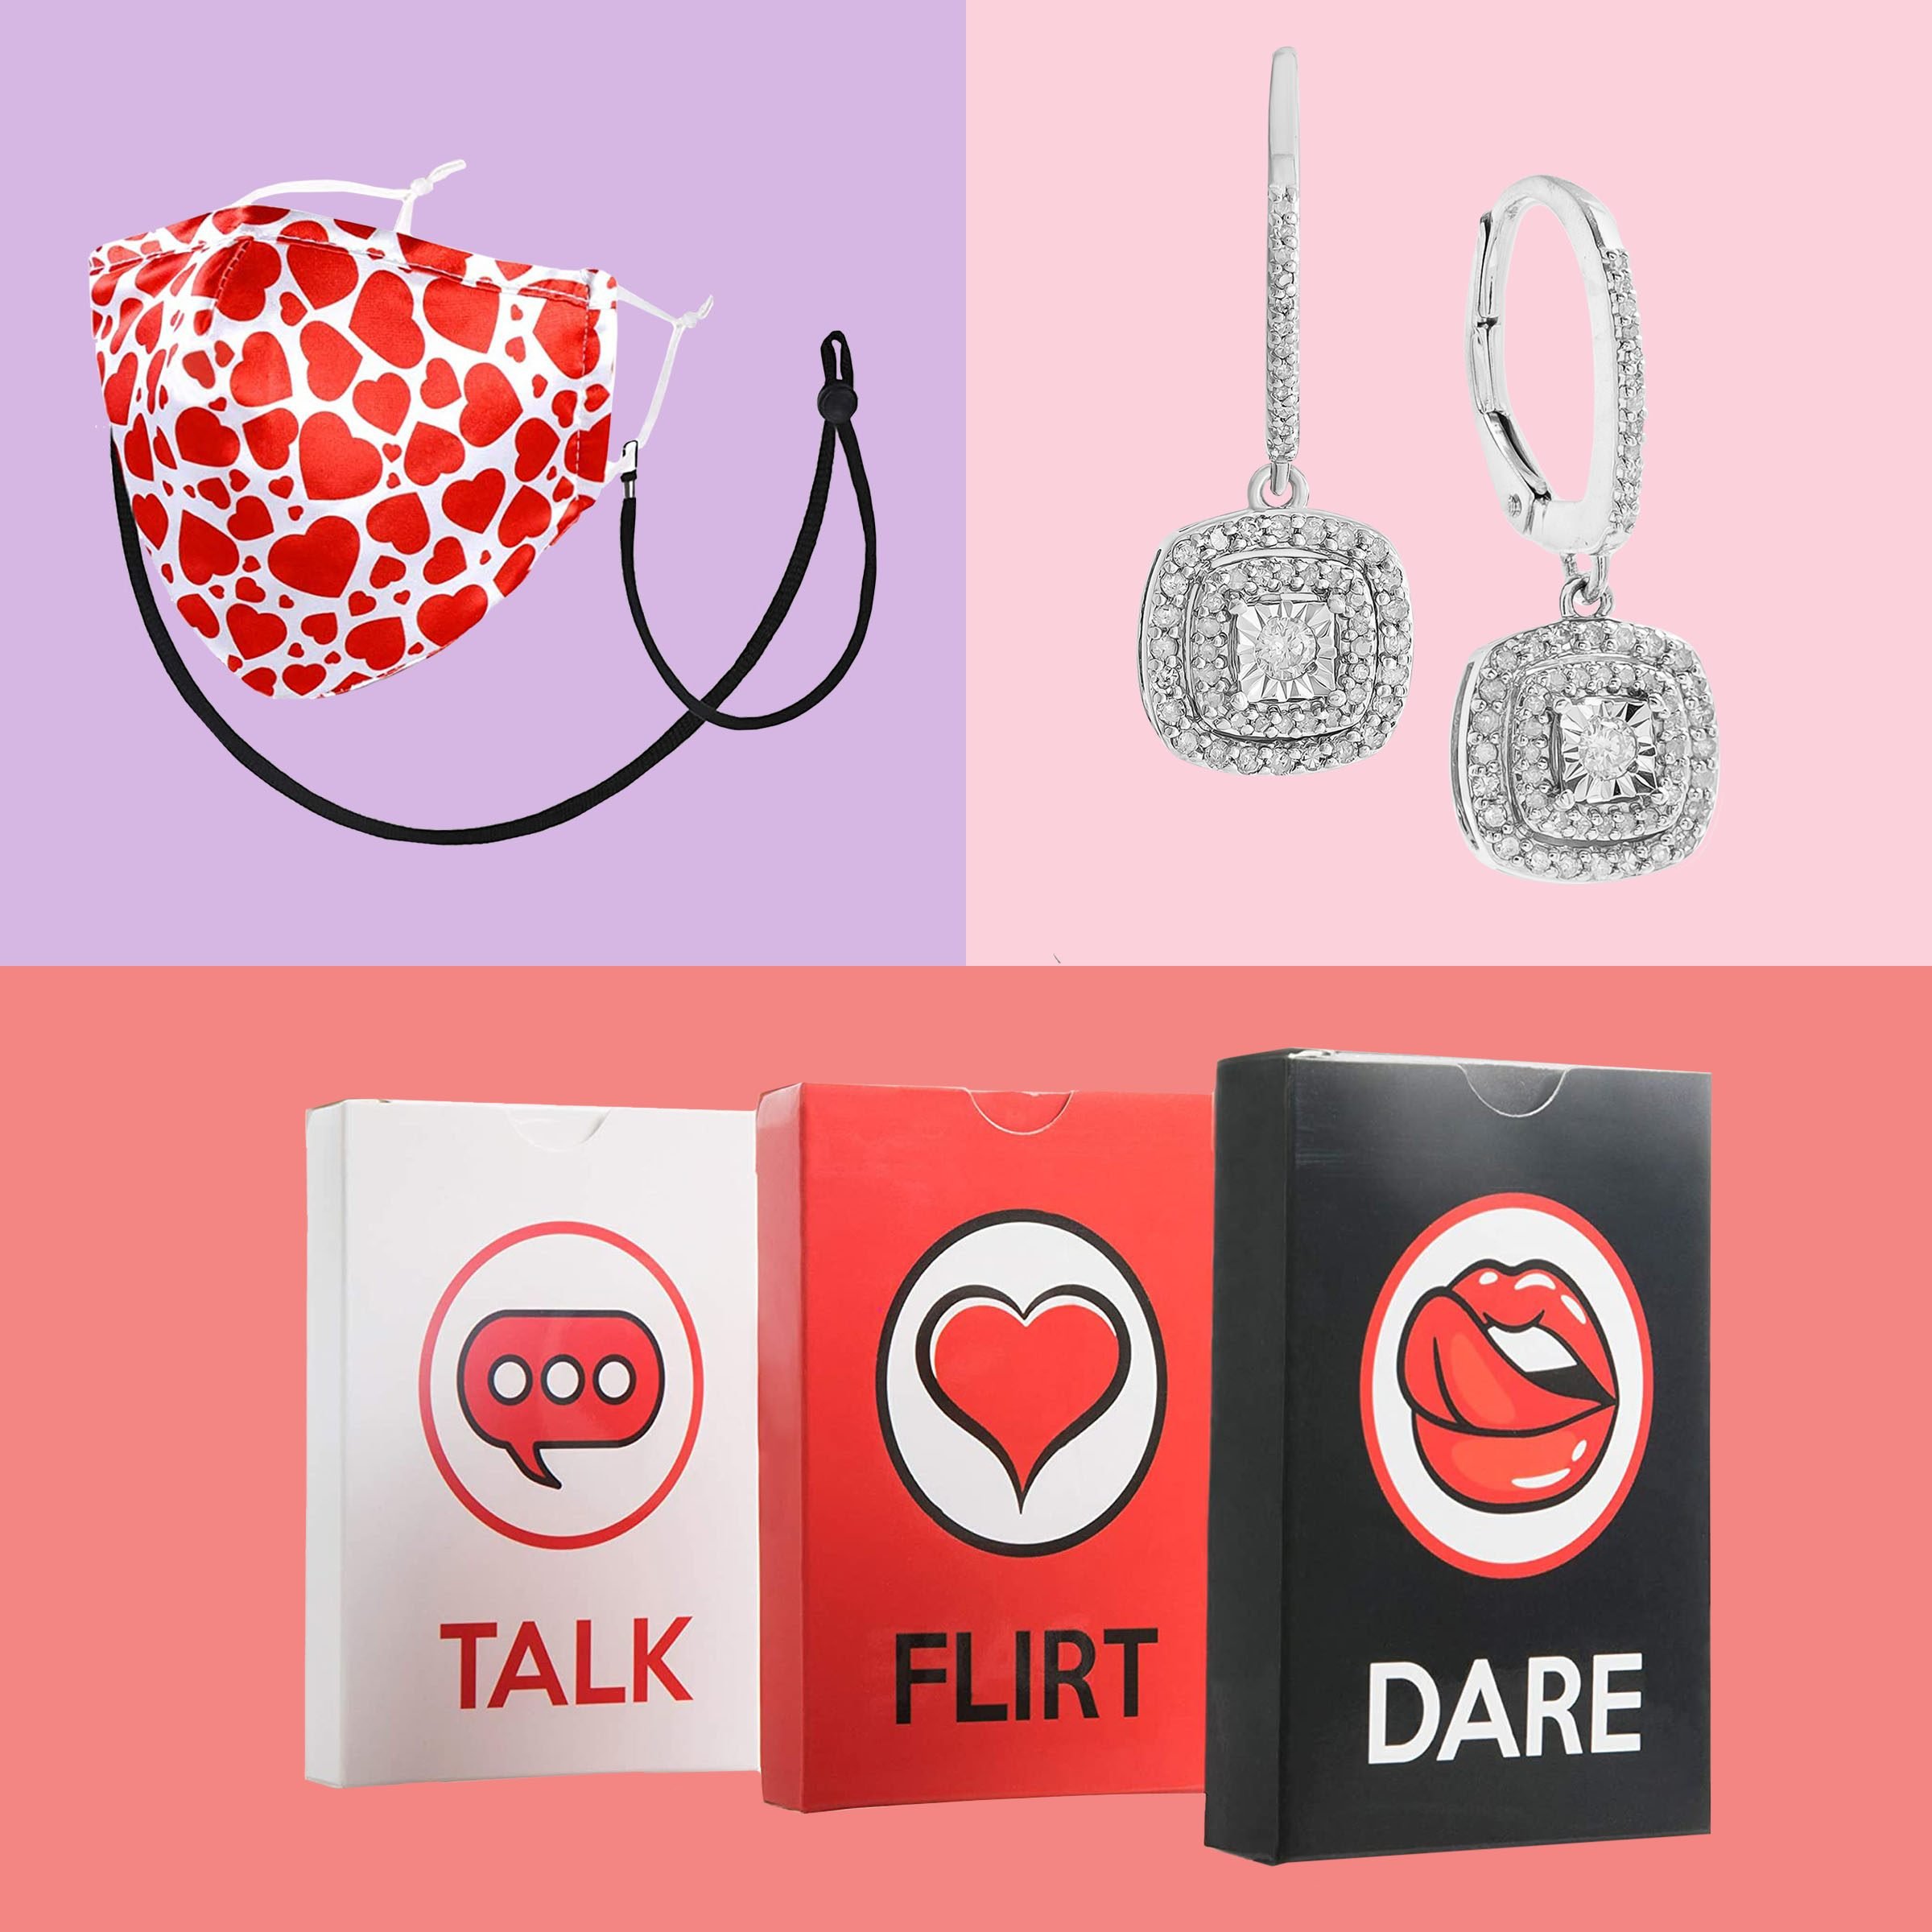 Cute Valentine's Day Gifts for Your Husband Ideas - 21 Valentine's Gifts  for Your Husband That's a Gift For You Too